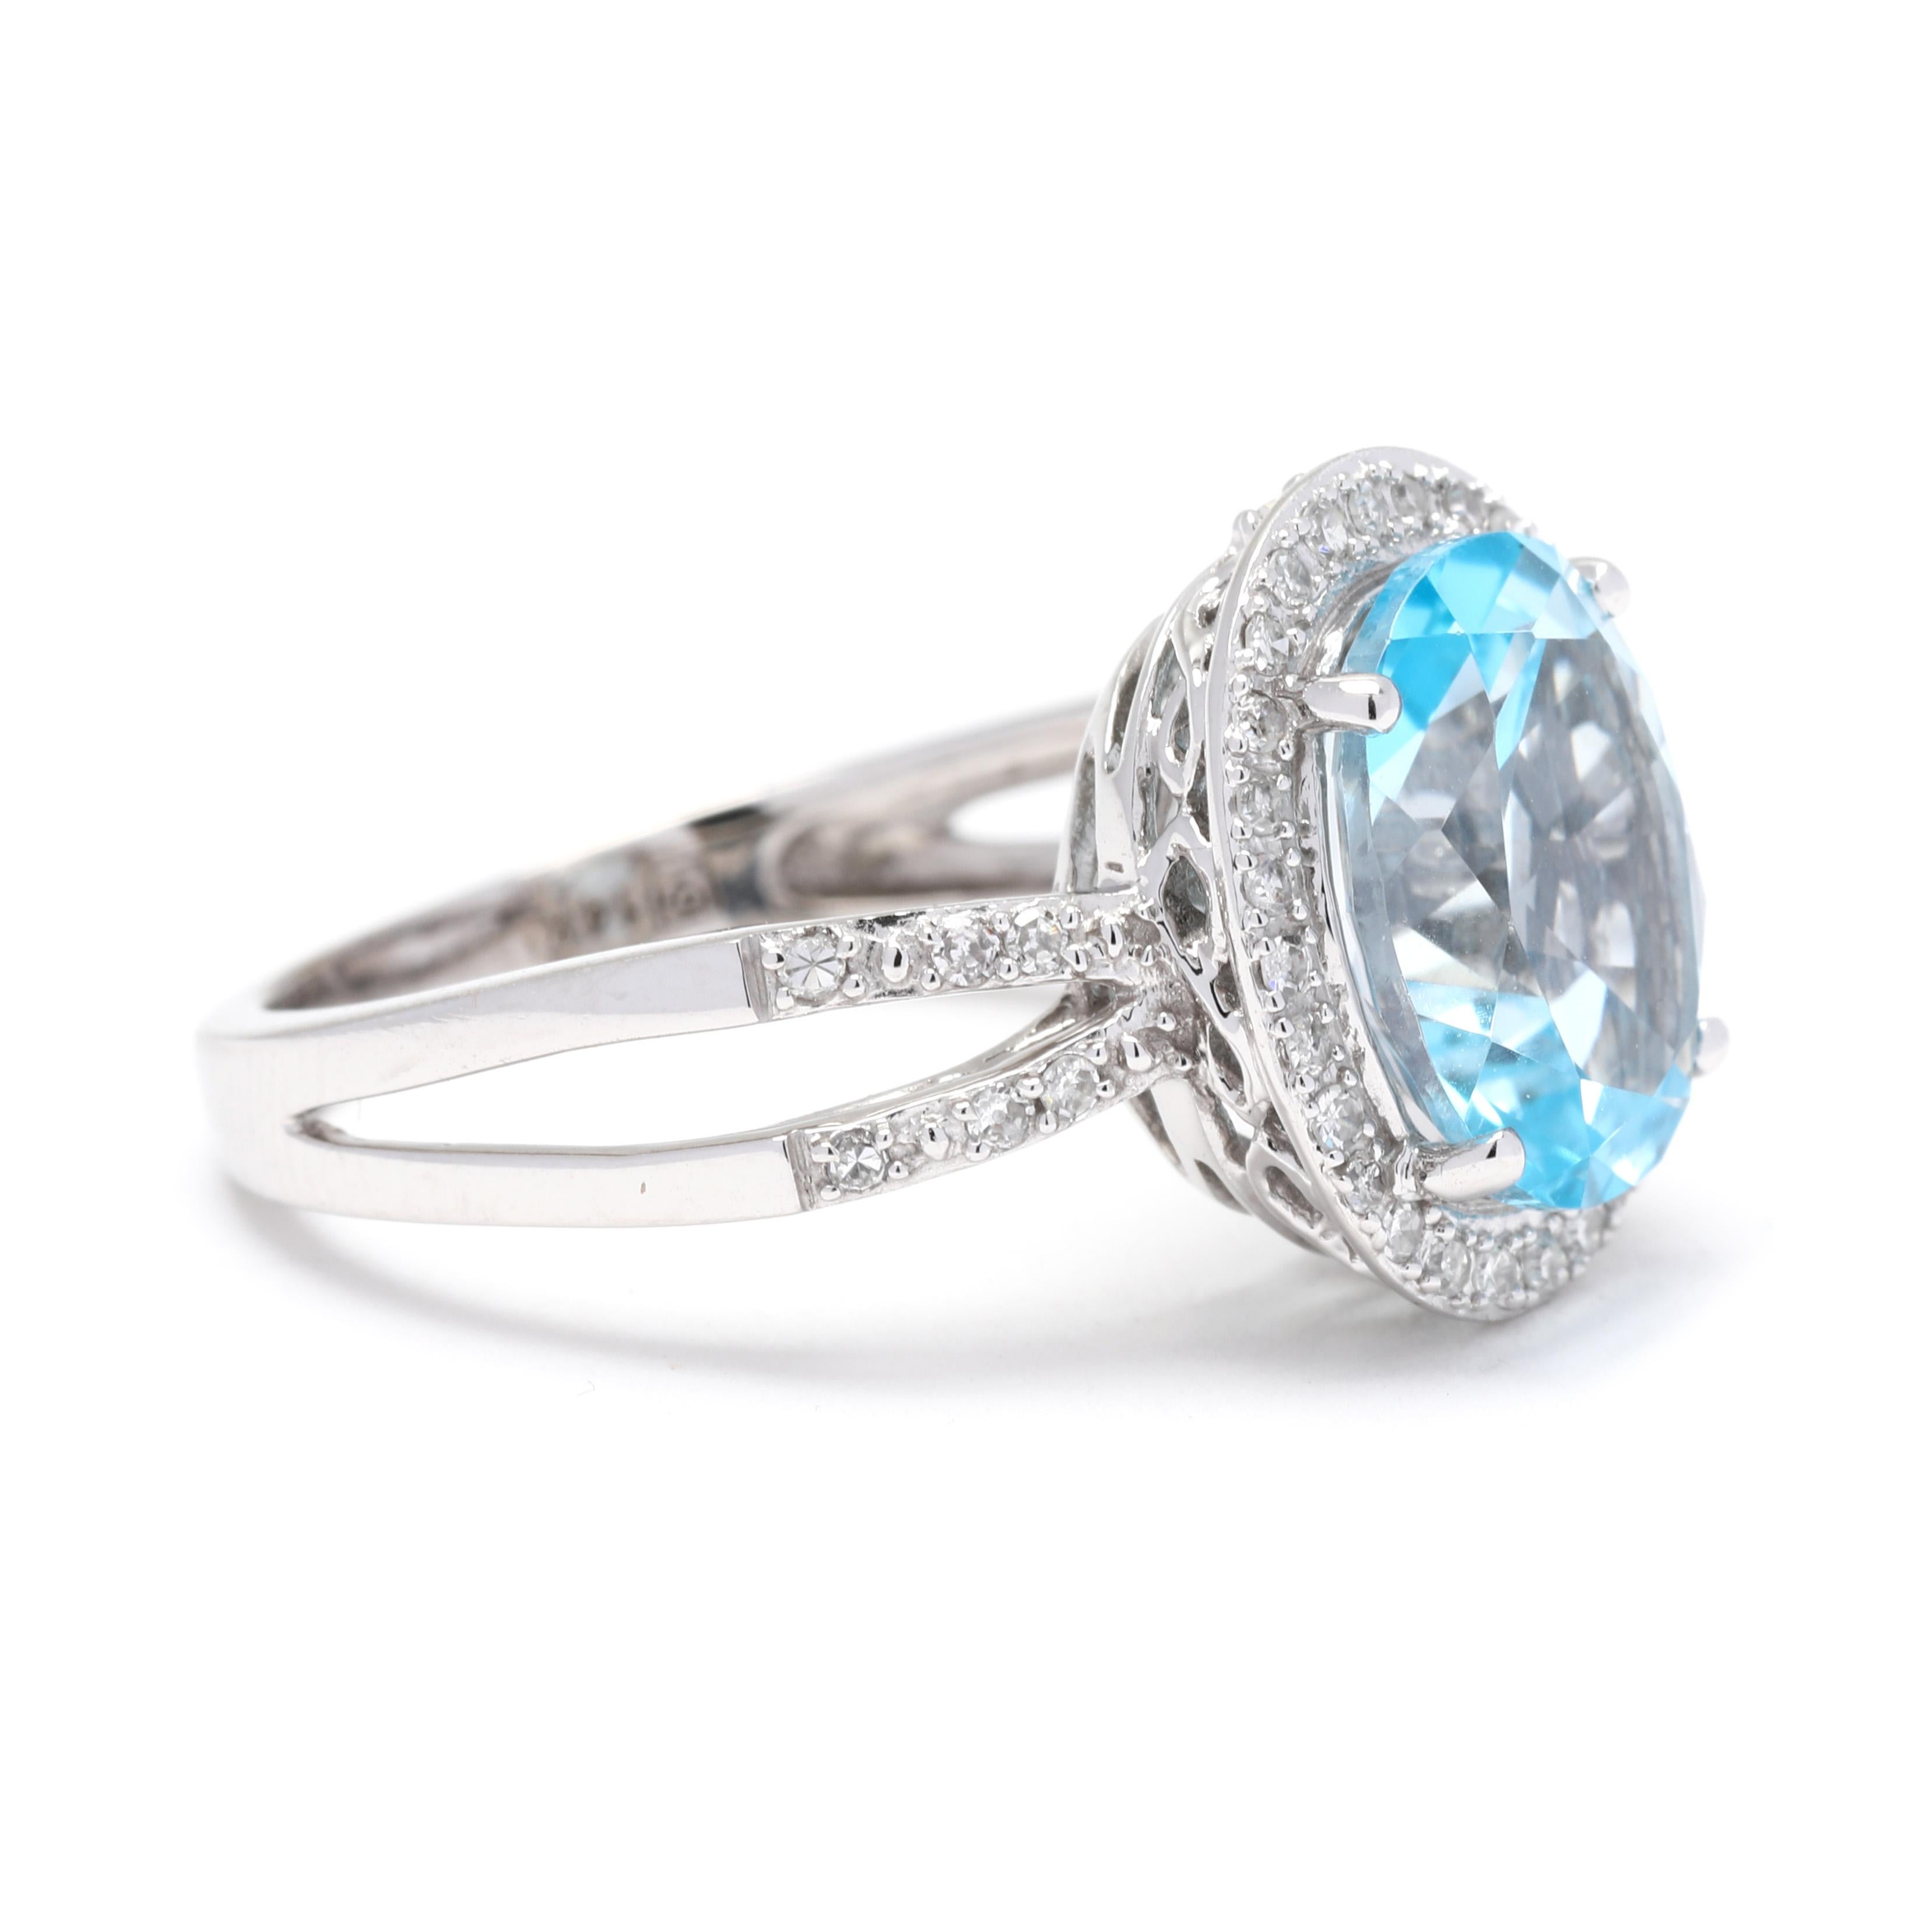 This beautiful ring showcases a 4.7 carat blue topaz gemstone surrounded by a halo of sparkling diamonds. The split shank design adds a modern twist to this classic piece. The ring is made of 14k white gold, giving it a timeless and luxurious look.